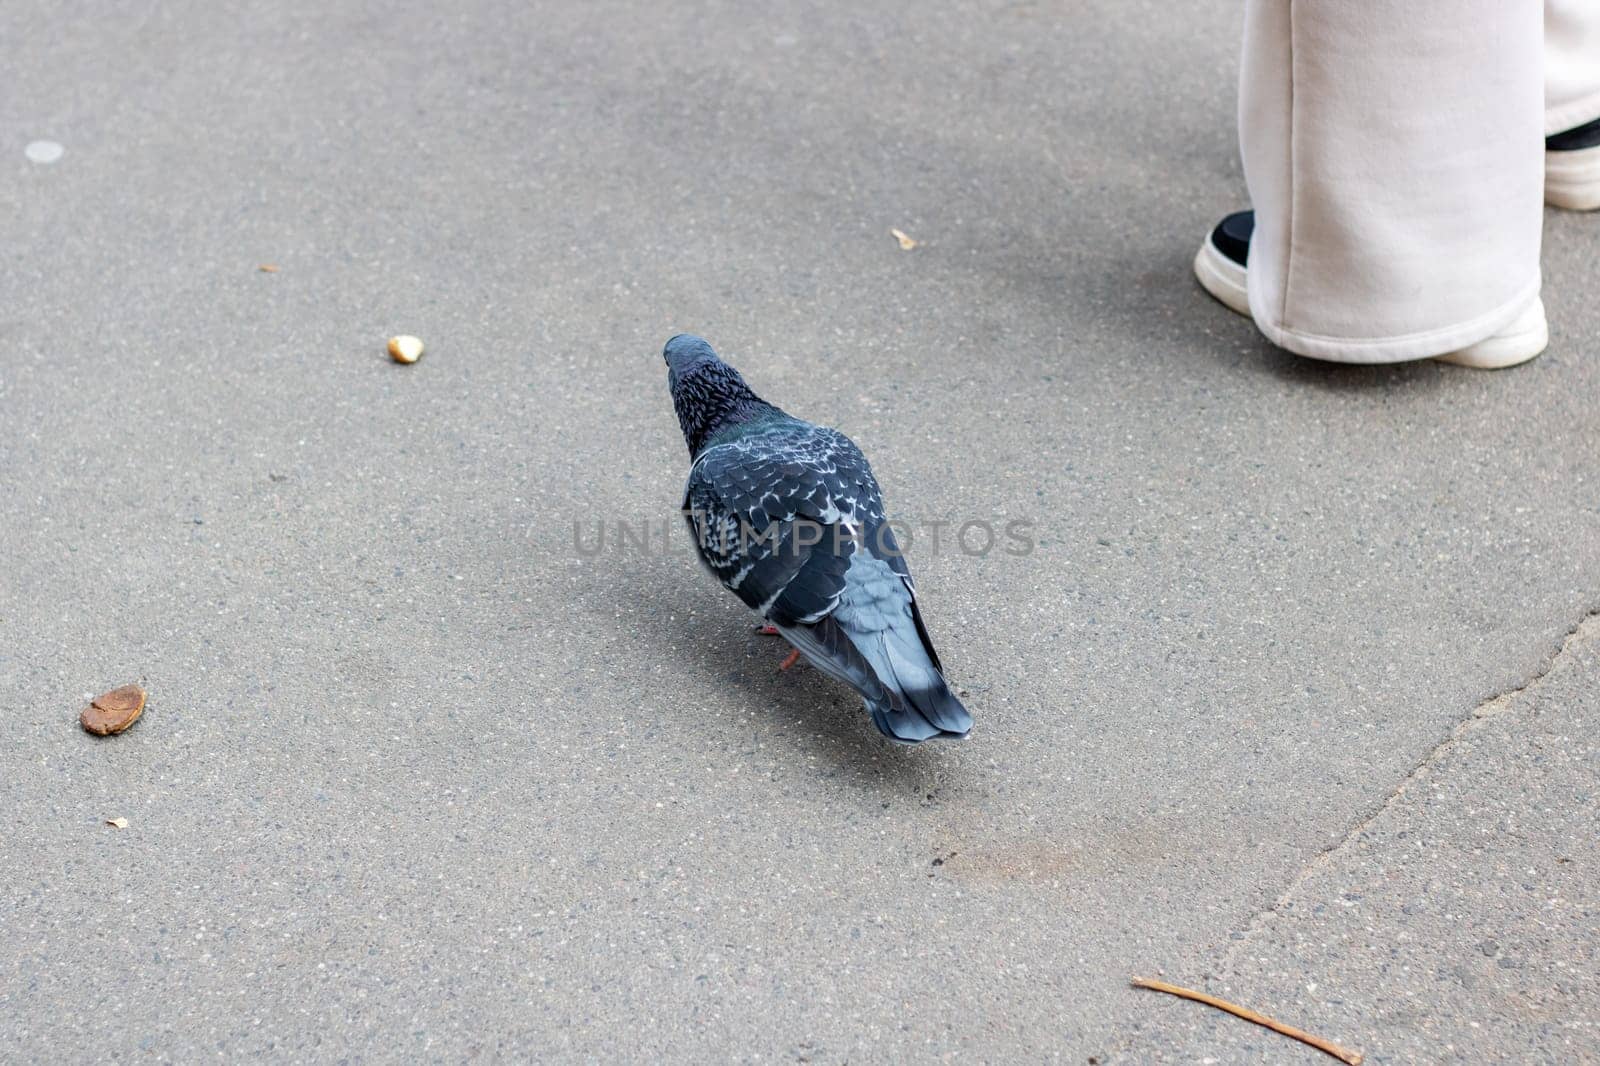 A pigeon on the asphalt and the legs of a man